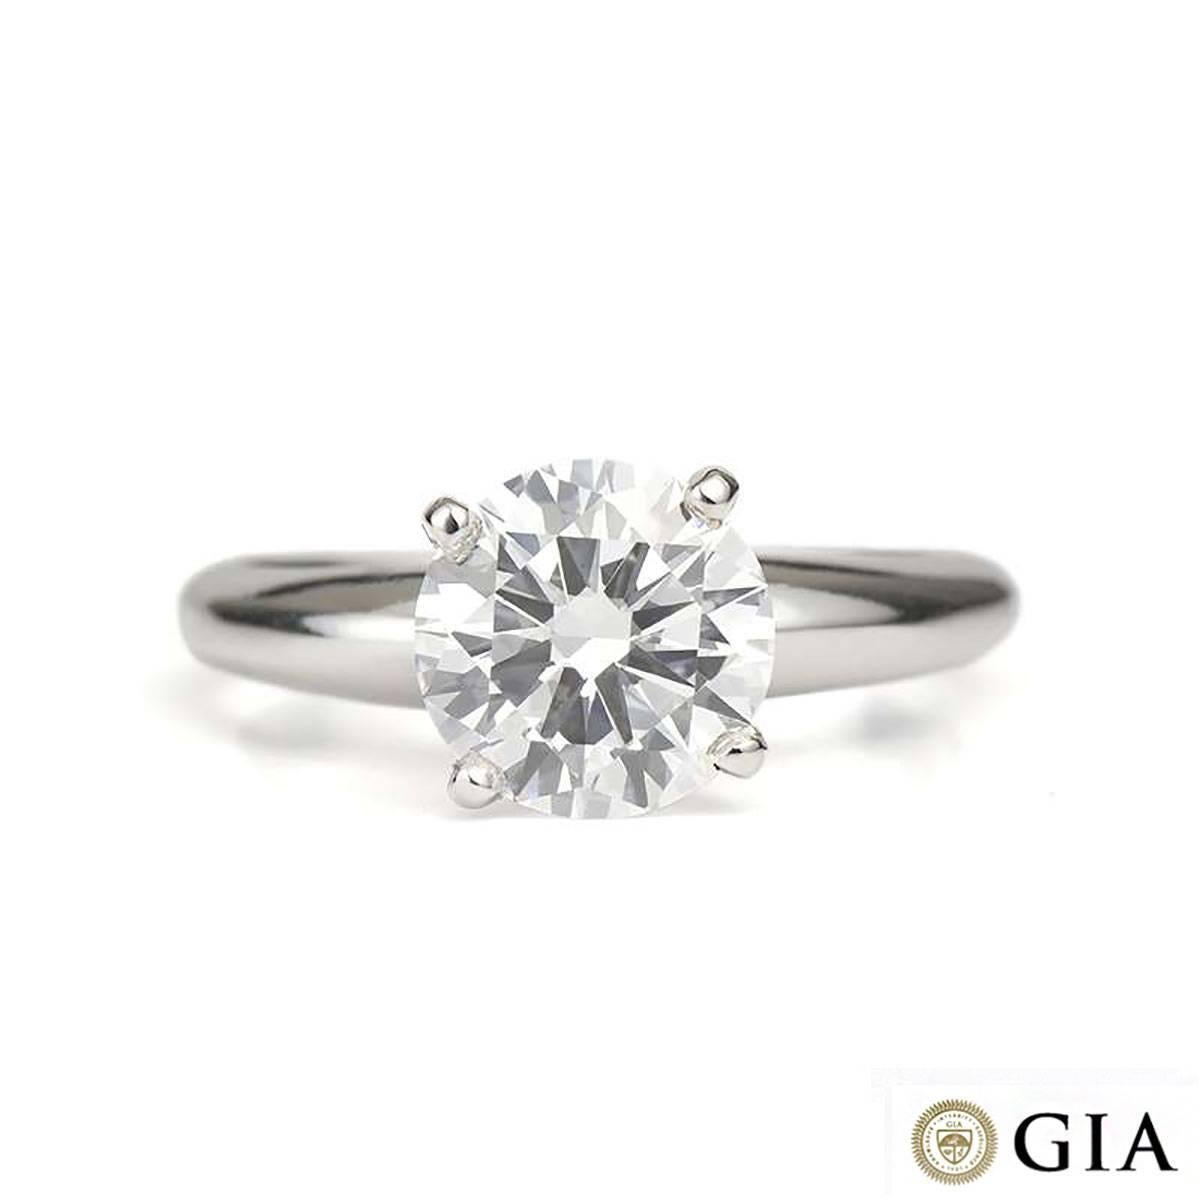 A round brilliant cut diamond set in a platinum 4 claw setting. The 1.55ct diamond is D colour and VVS2 clarity. The ring is currently a size UK K½, US 5.5, EU 50.5 but can be adjusted for the perfect fit and has a gross weight of 4.24 grams.

The